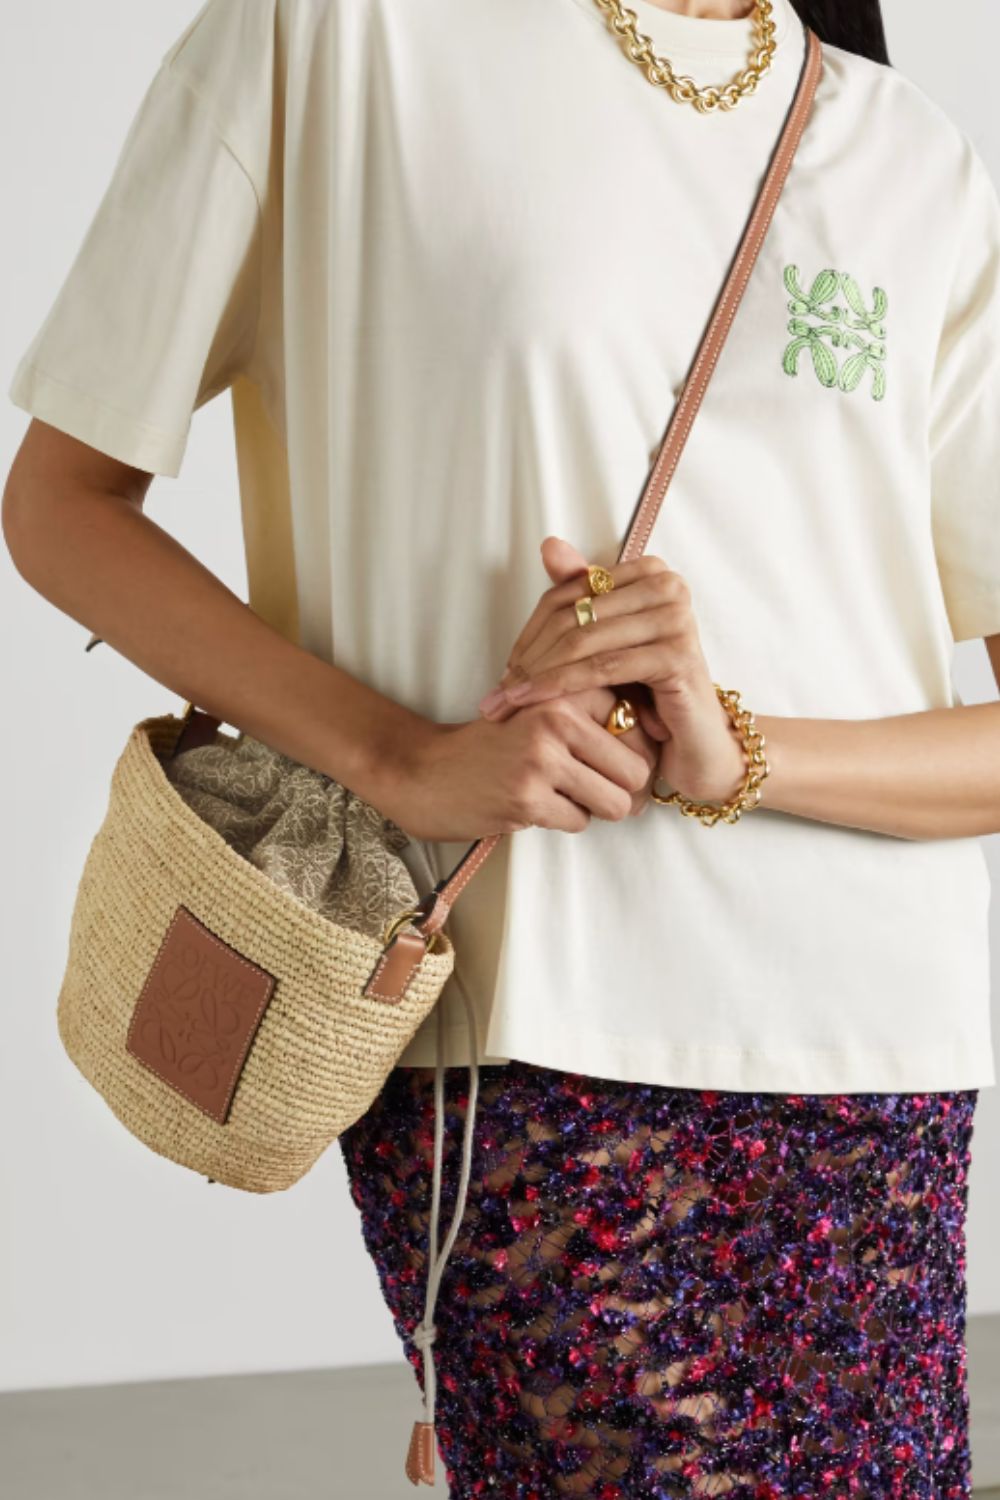 The LOEWE Paula's Ibiza Pochette bag at Net-A-Porter, is a crossbody style ideal for travel